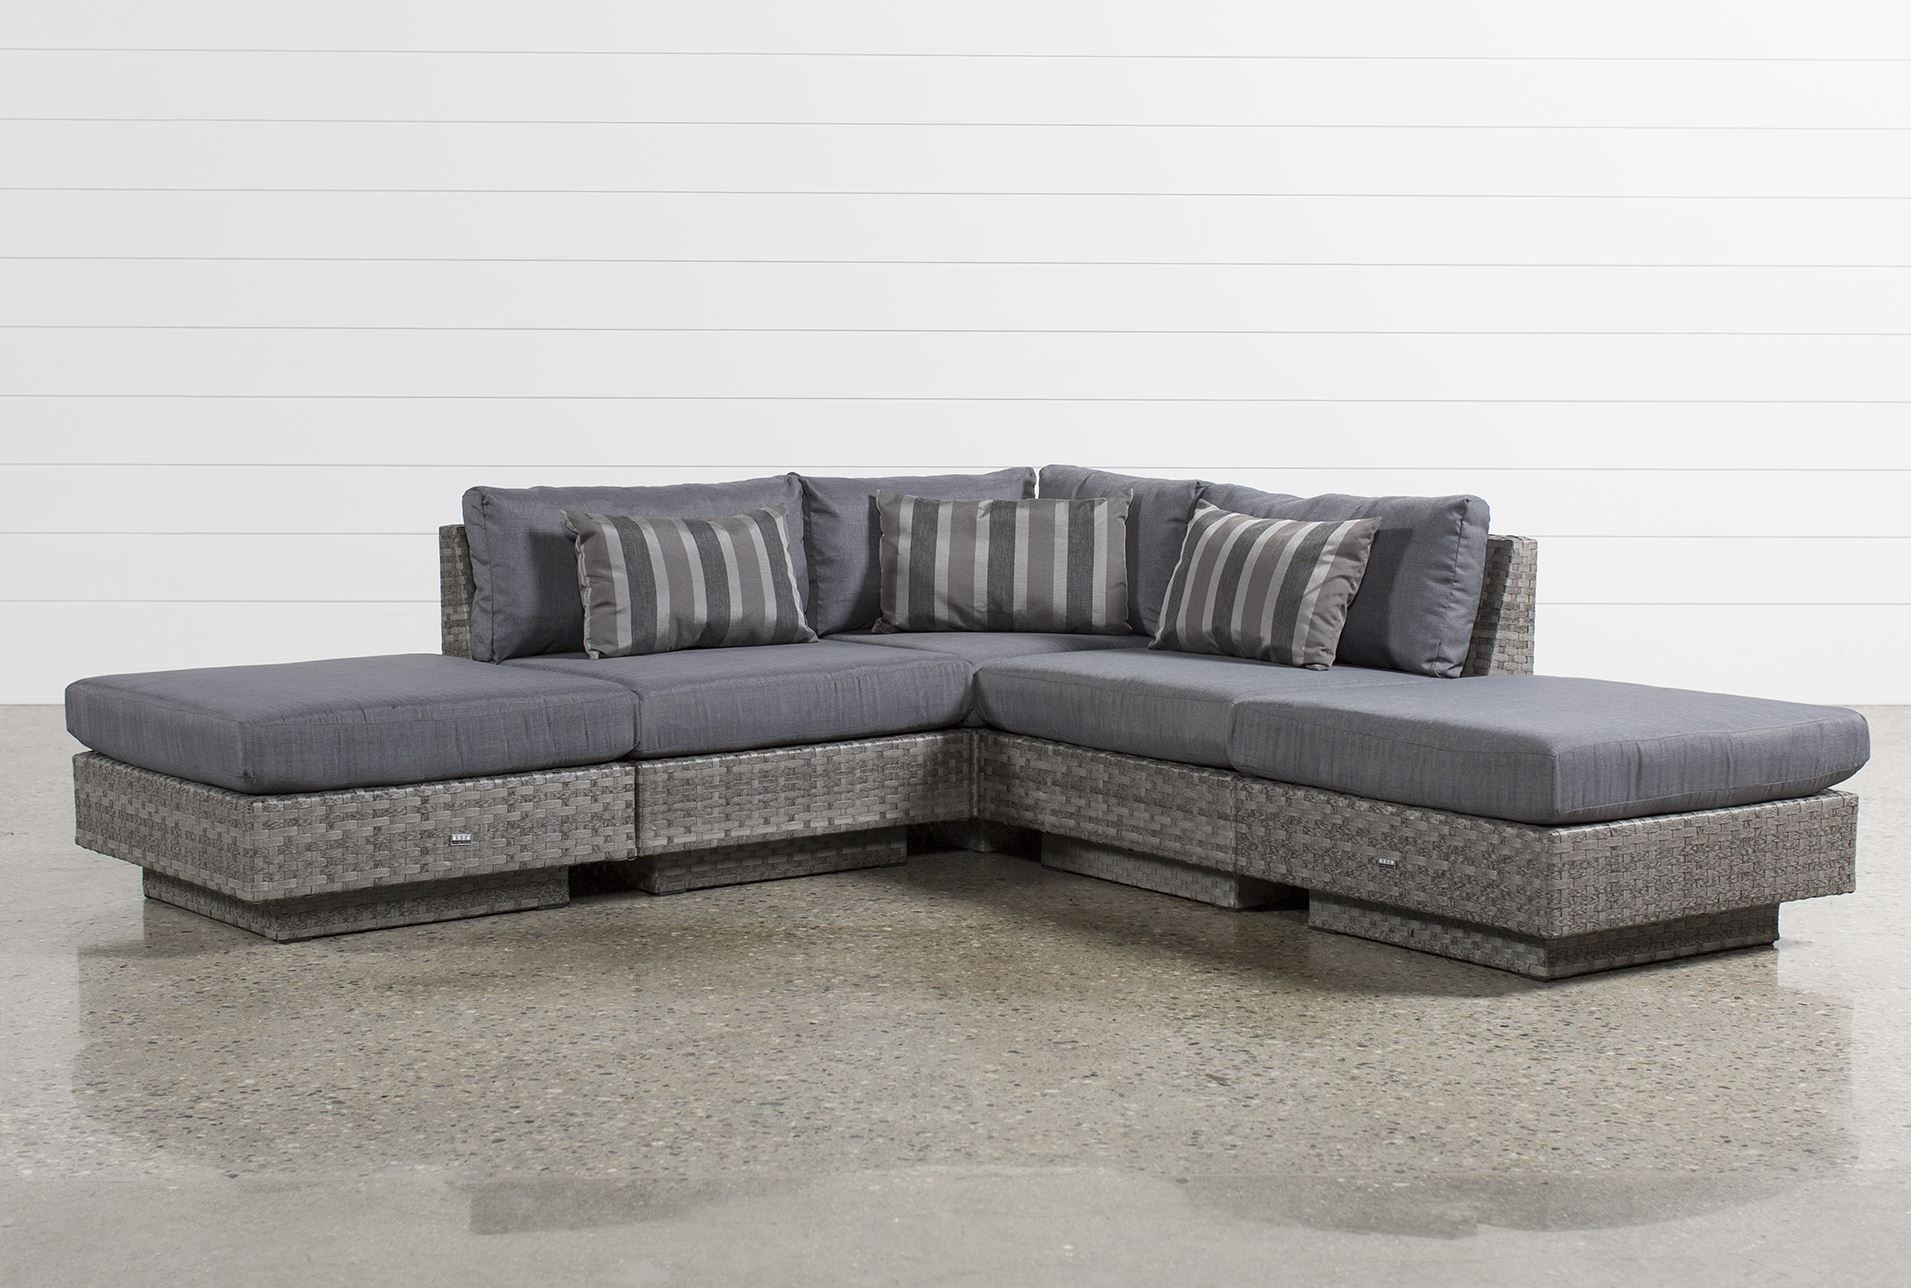 3 Piece Sectional Sofa Dimensions | Baci Living Room Intended For Malbry Point 3 Piece Sectionals With Raf Chaise (View 15 of 30)